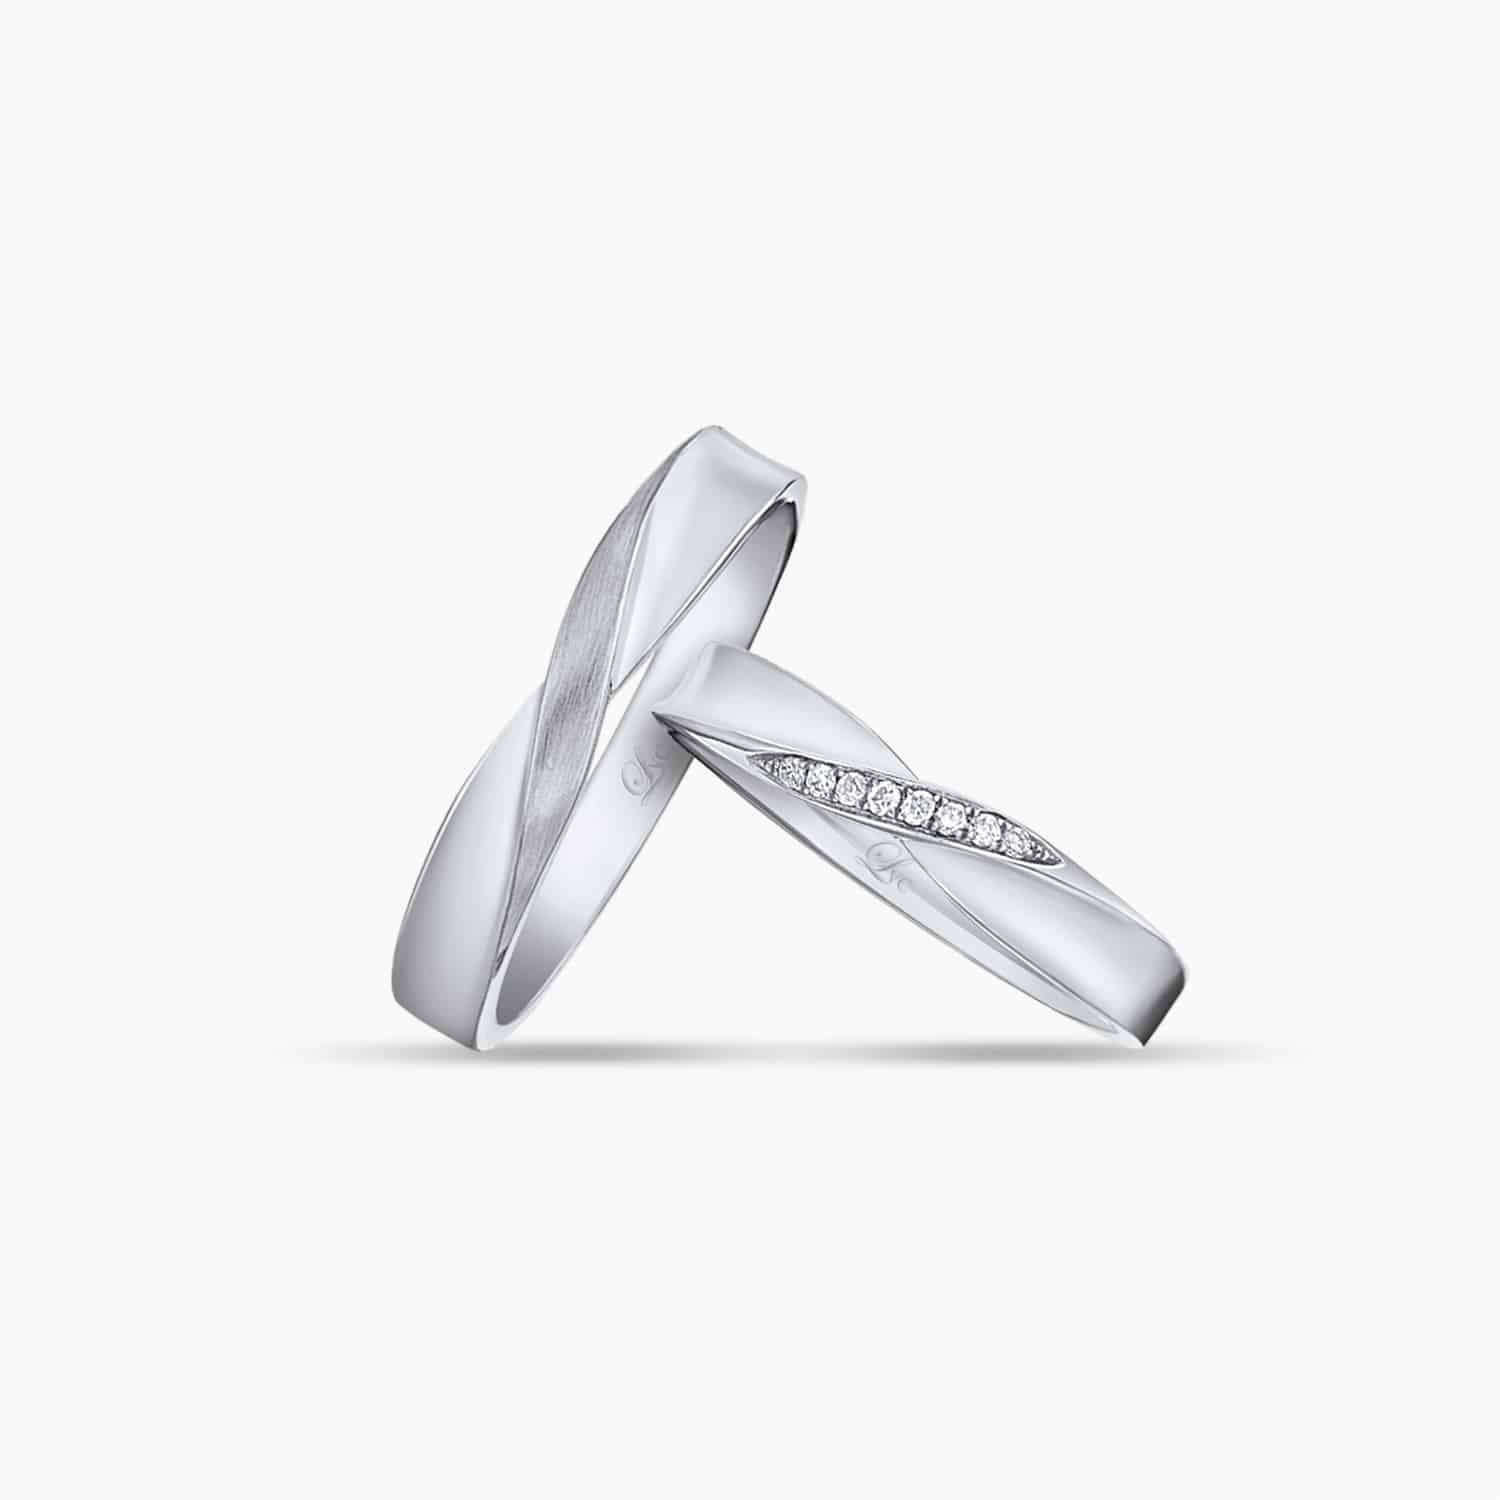 LVC Desirio Infinity Couple Wedding Ring in White Gold with a Band of Diamonds